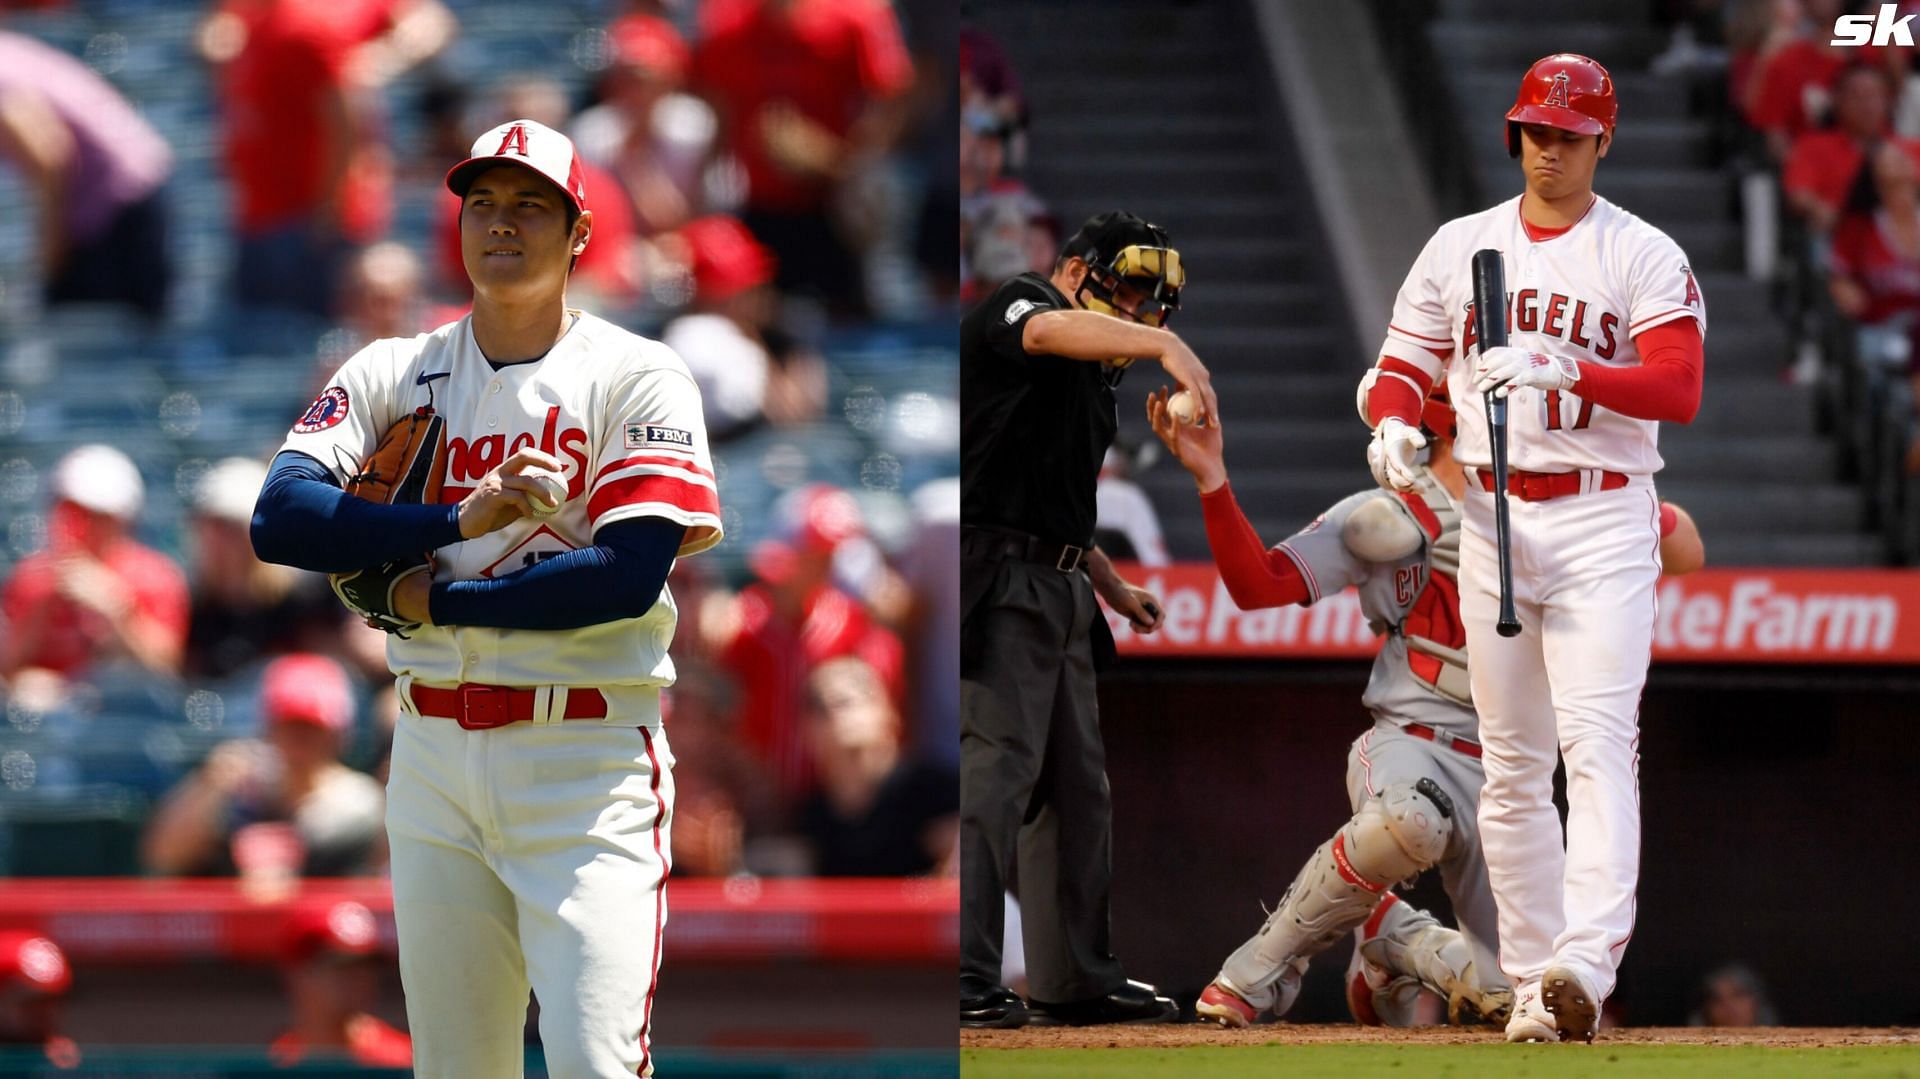 Top 3 landing spots for $500,000,000 Shohei Ohtani after UCL tear